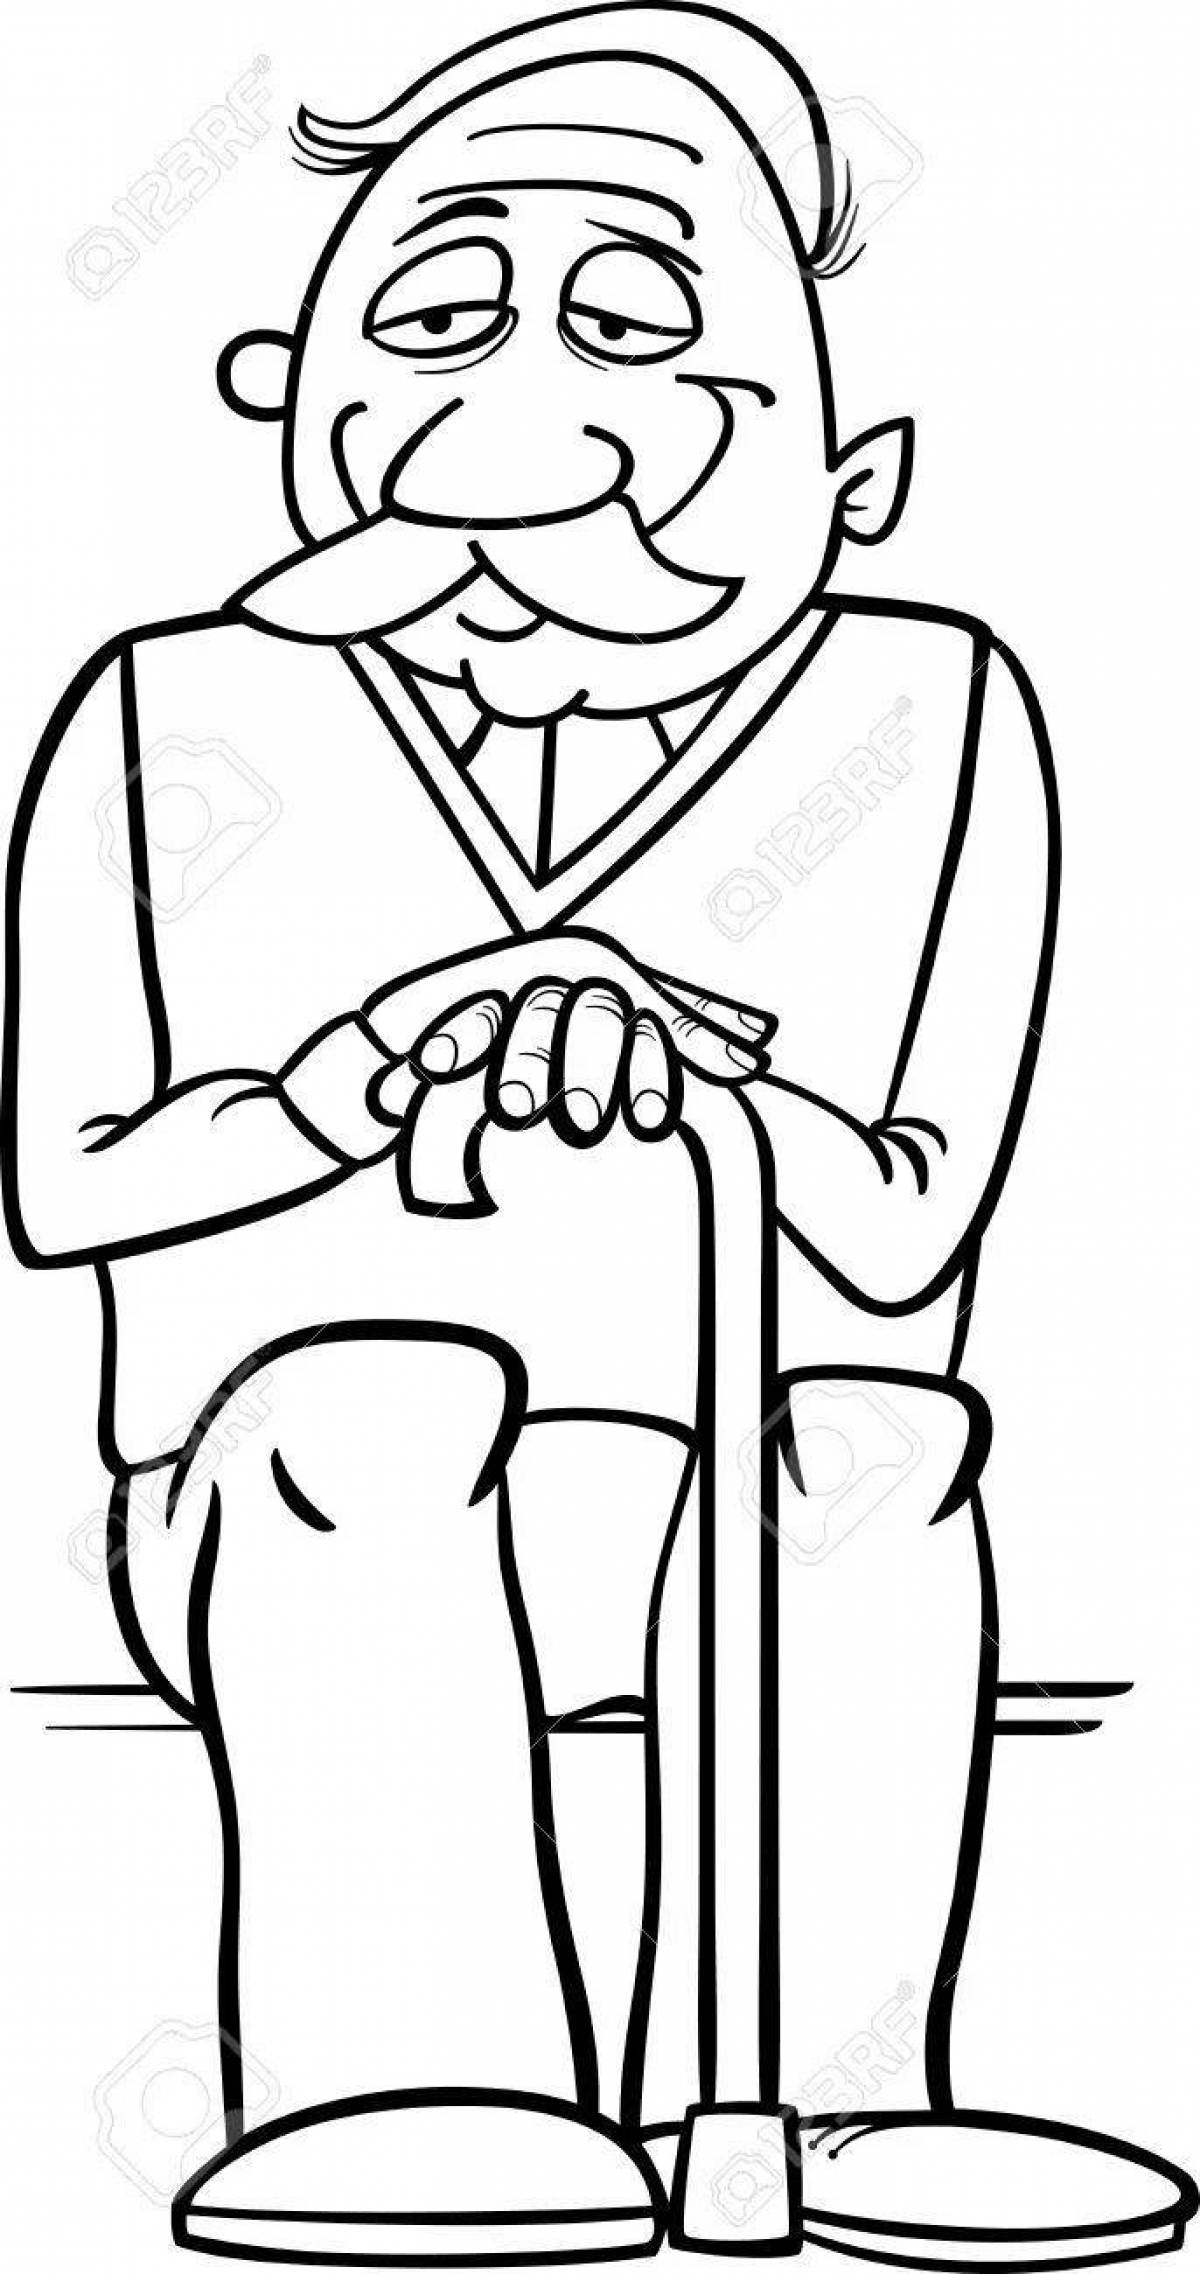 Playful grandfather coloring page for kids